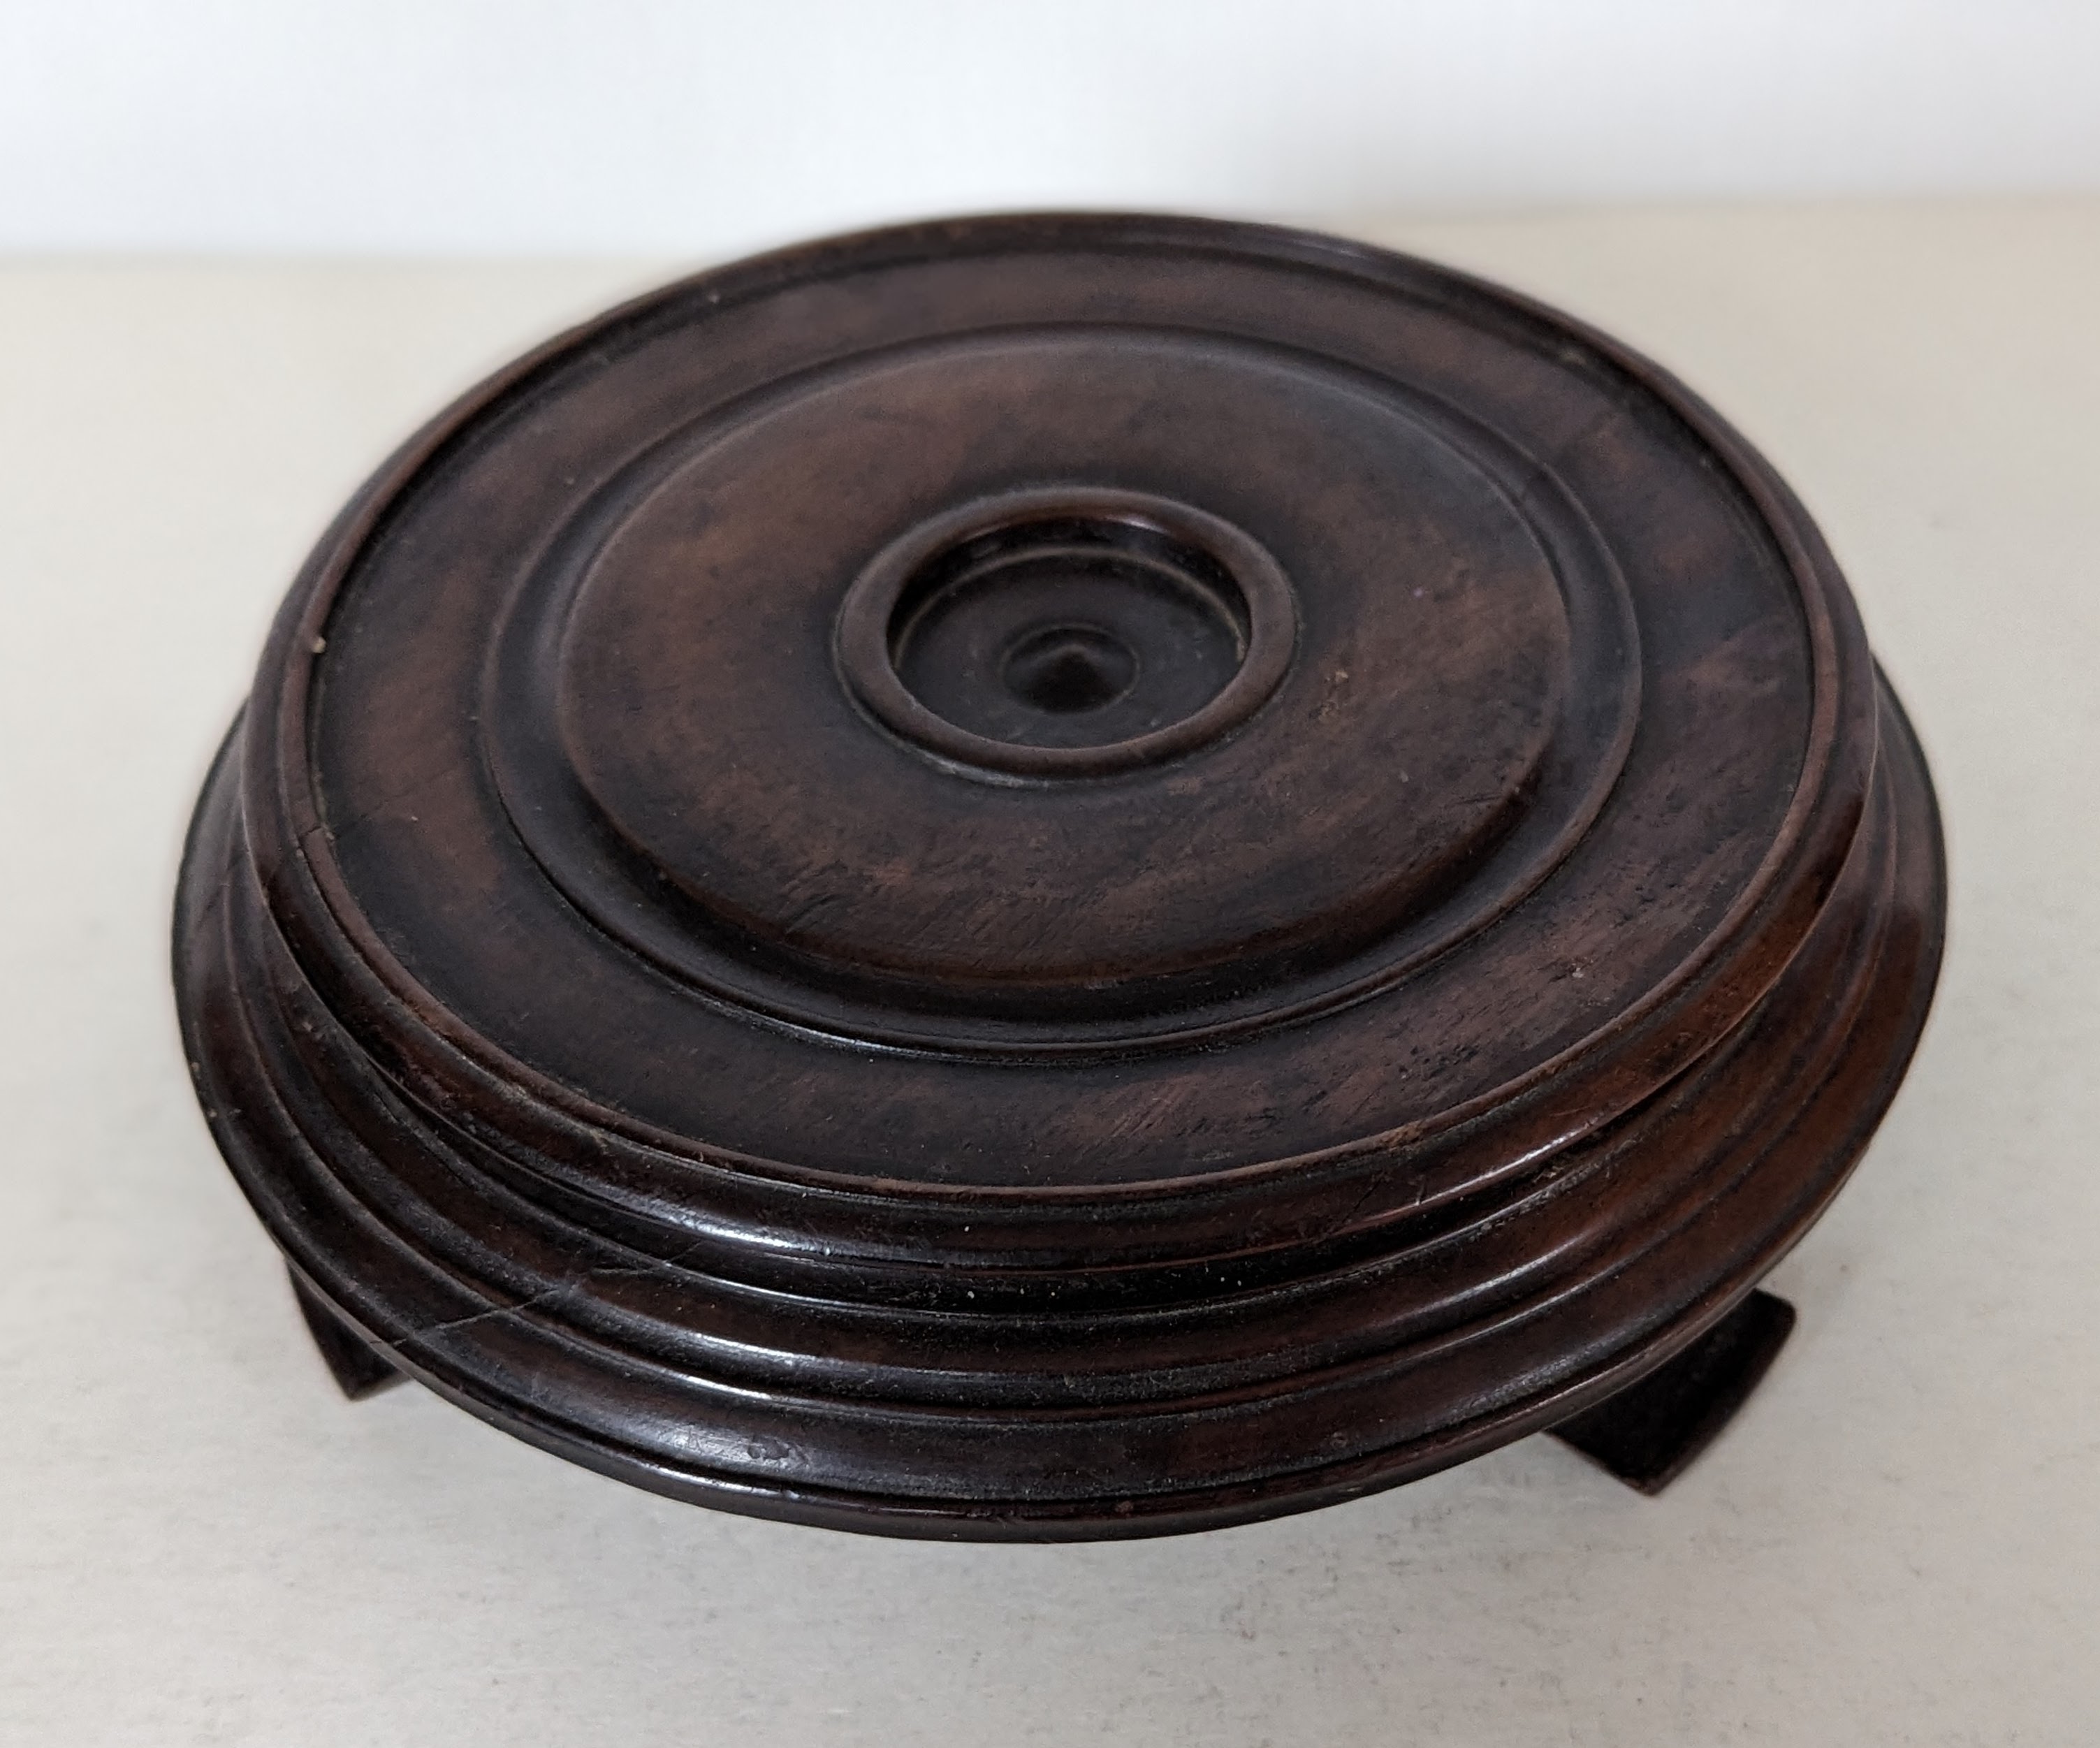 A late 17th/early 18th century Chinese bronze bombe censer - Image 5 of 7